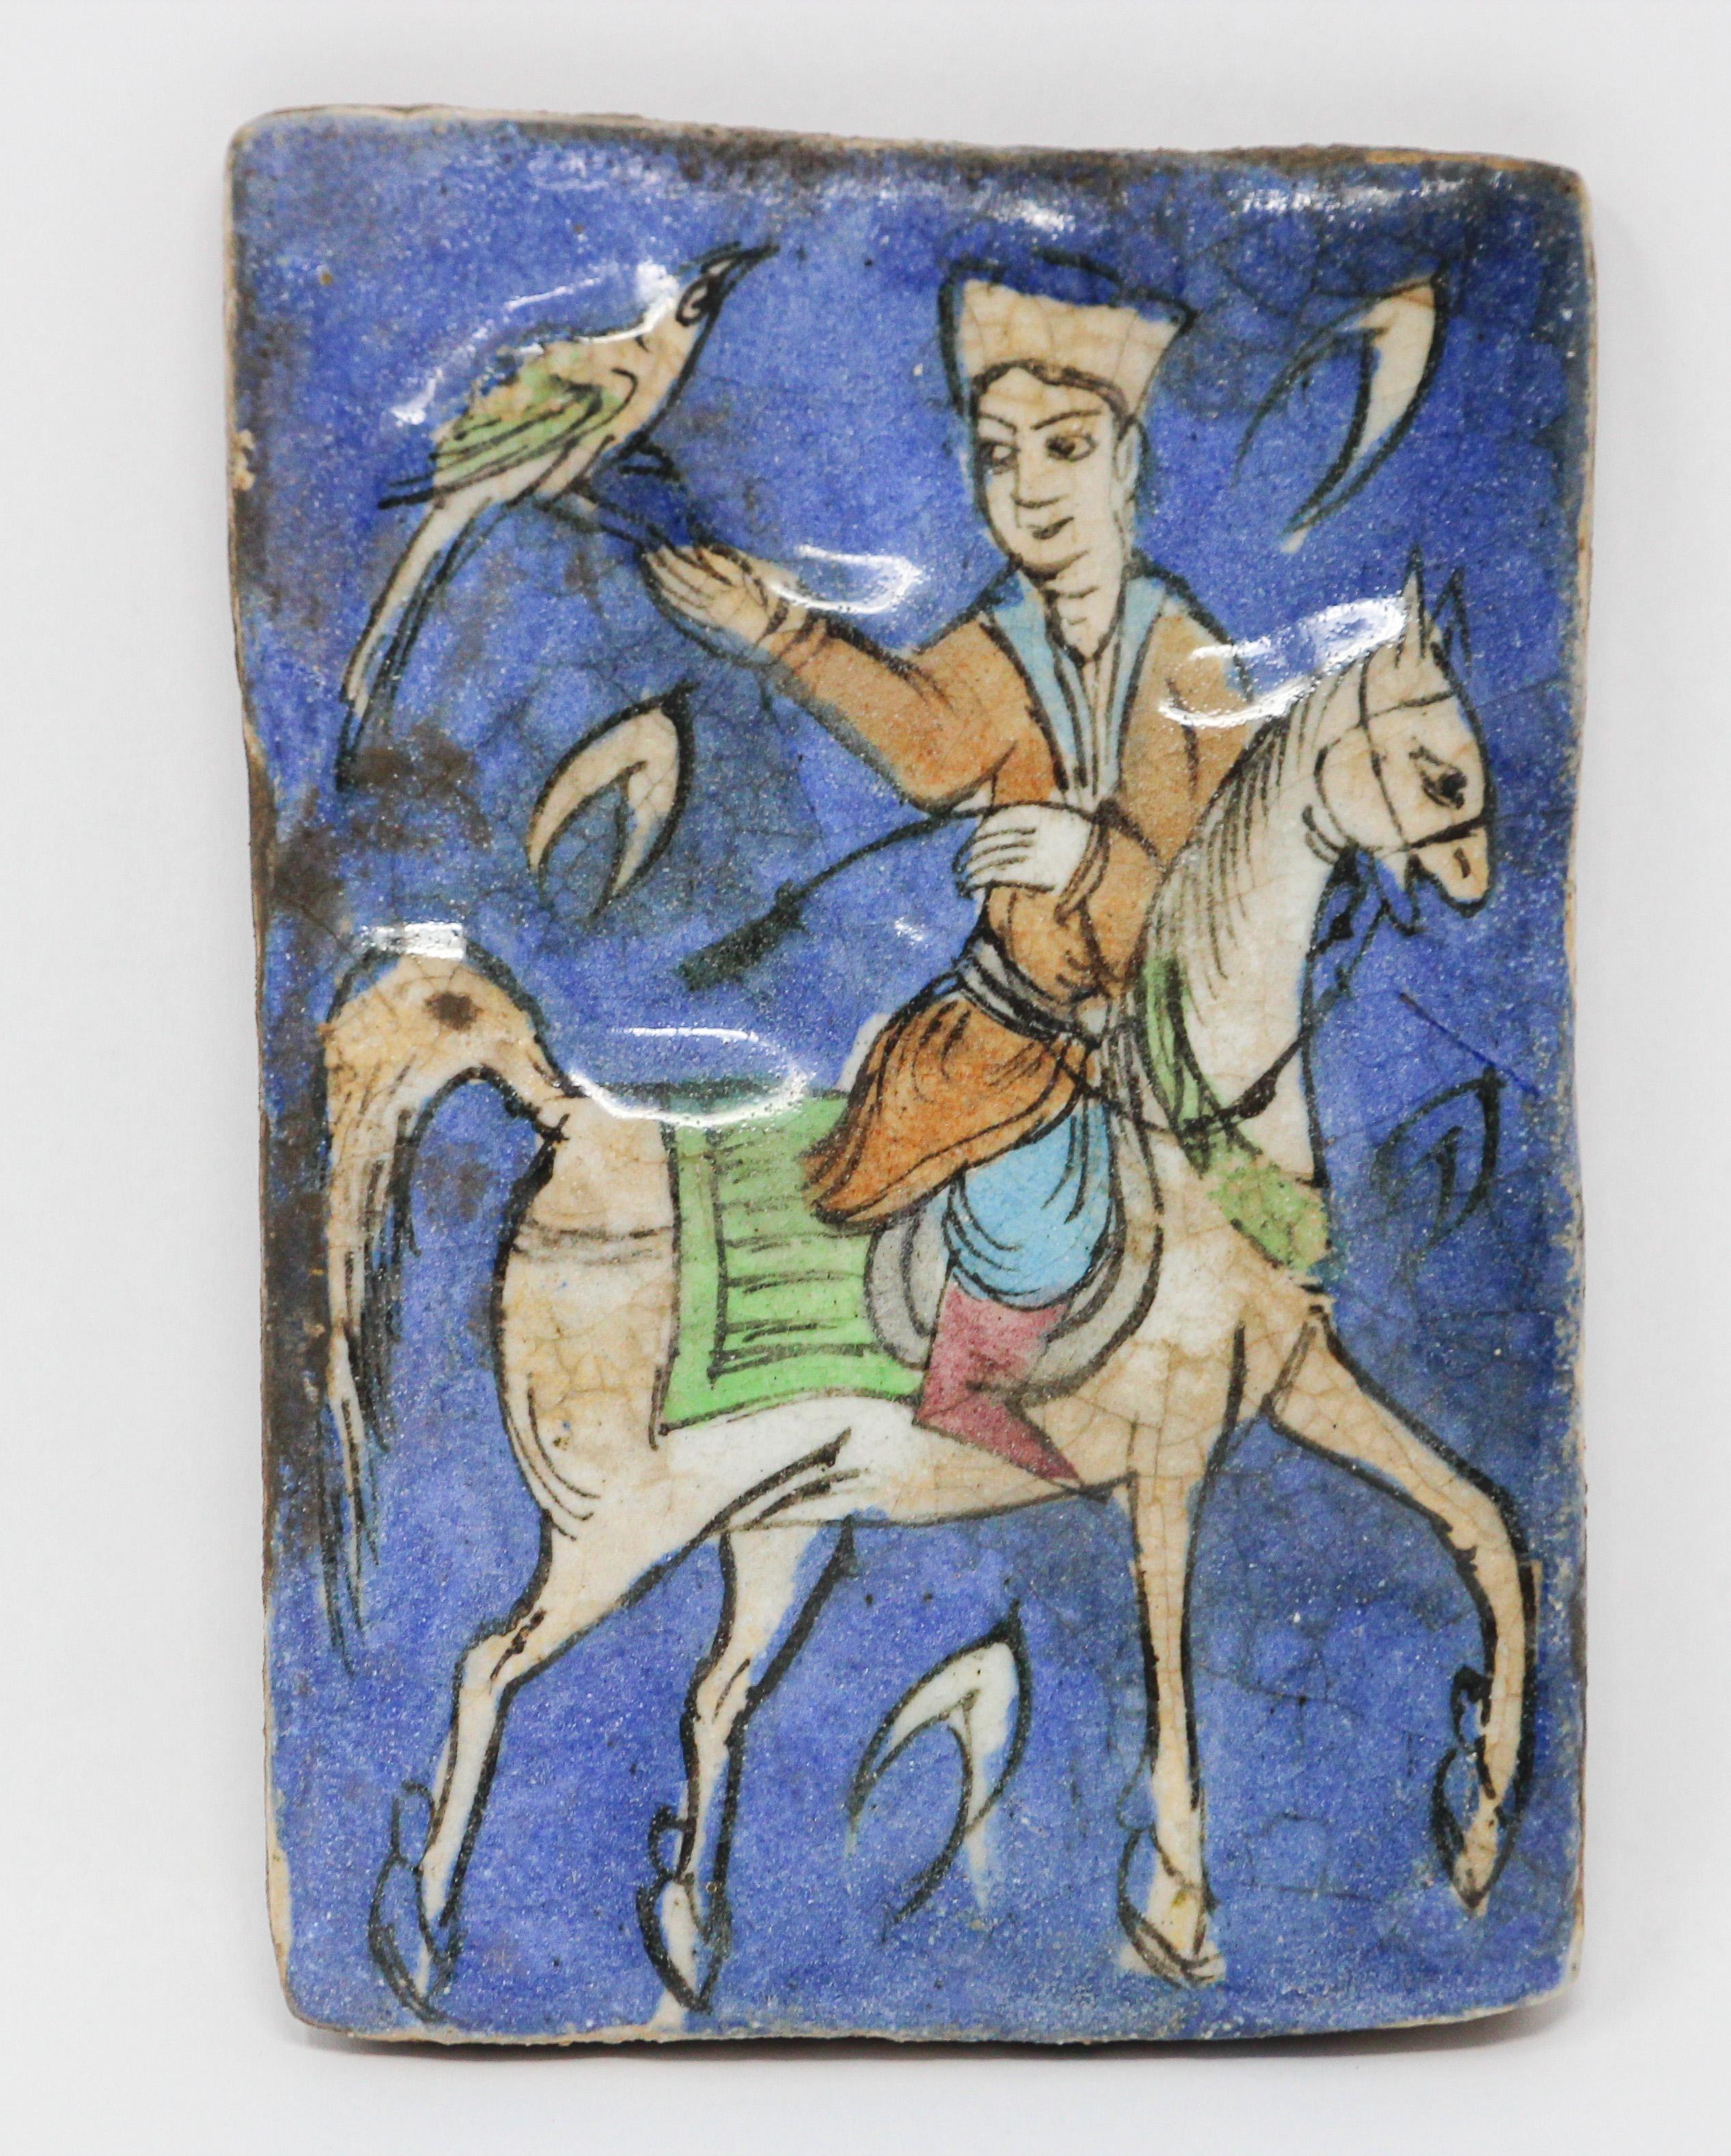 Beautiful Turkish ceramic blue glazed tile hand painted with a young man riding on horse holding a bird.
Qajar Middle Eastern style under-glazed pottery ceramic tile with raised hand painted design.
Handcrafted decorative crackle glazed ceramic